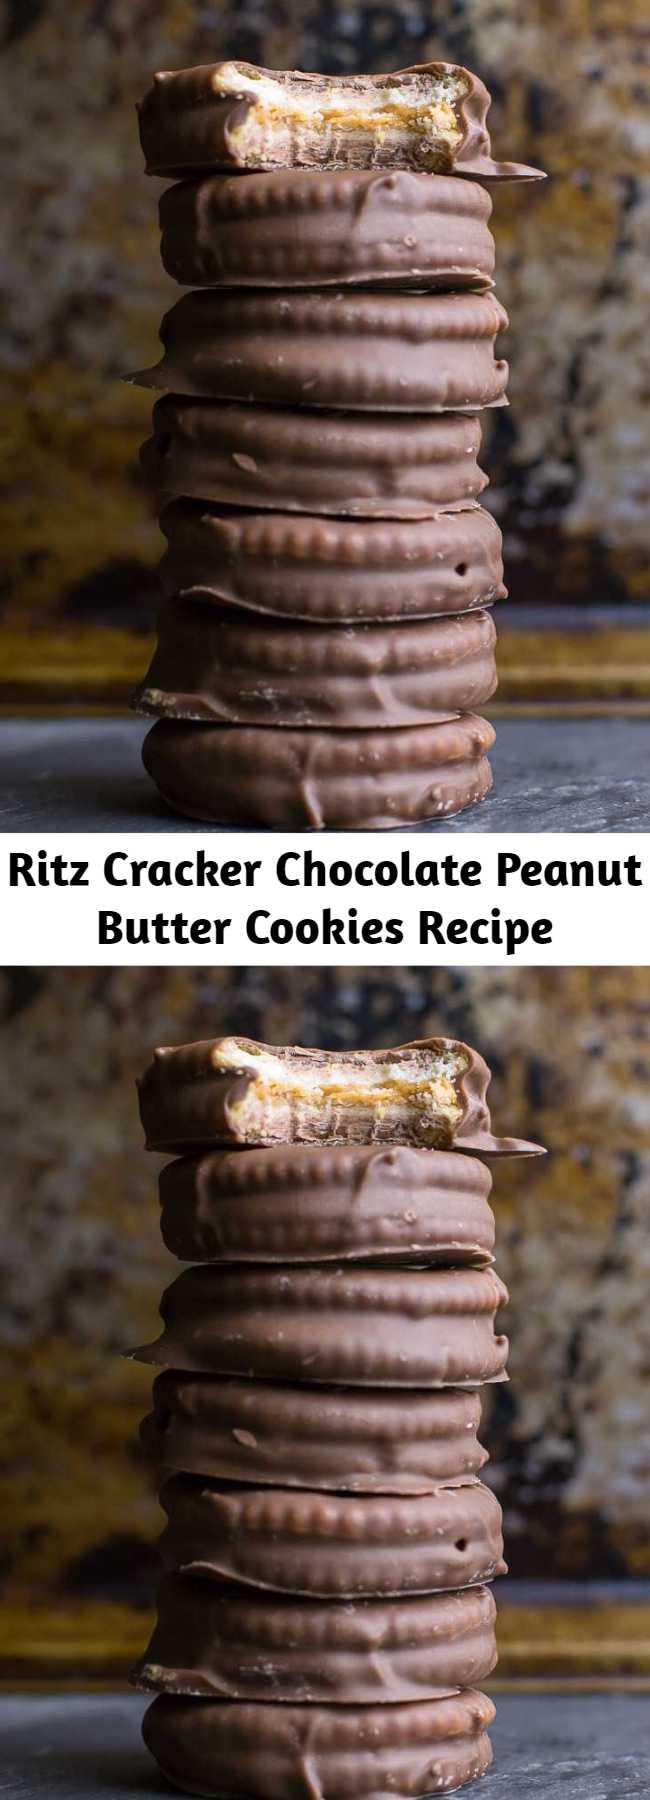 Ritz Cracker Chocolate Peanut Butter Cookies Recipe - Ritz Cracker Chocolate Peanut Butter Cookies are the perfect combo of creamy peanut butter, milk and white chocolate, and butterscotch chips. These freezer cookies are great for making ahead of the busy holiday season but they disappear quickly!